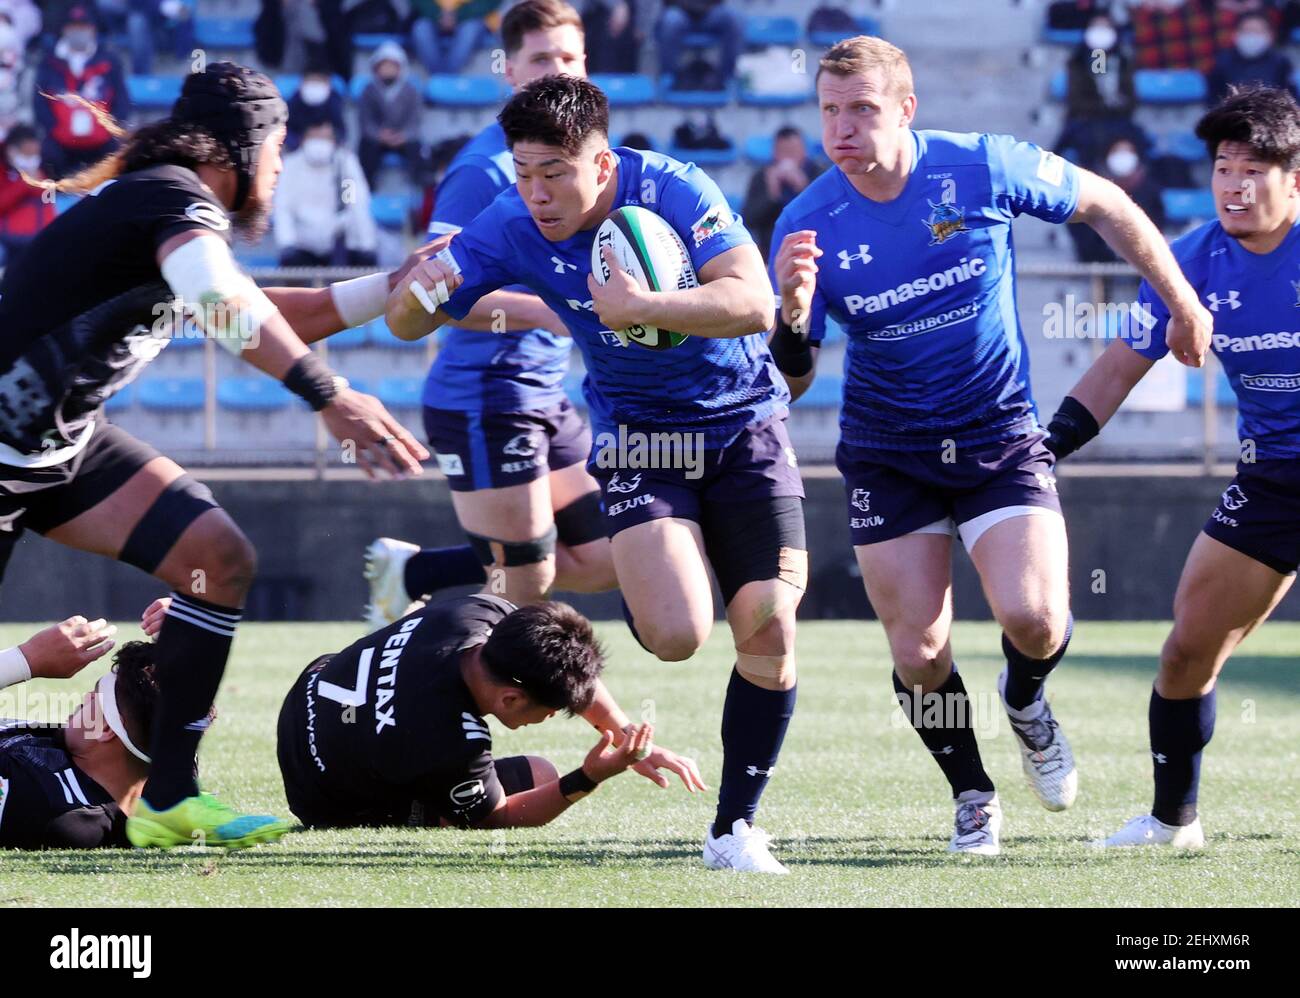 Tokyo, Japan. 20th Feb, 2021. Panasonic Wild Knights fly half Rikiya Matsuda carries the ball at an opening game of Japan Rugby Top League 2021 tournament at the Prince Chichibu rugby stadium in Tokyo on Saturday, February 20, 2021. Panasonic Wild Knights defeated Ricoh Black Rams 55-14. Credit: Yoshio Tsunoda/AFLO/Alamy Live News Stock Photo